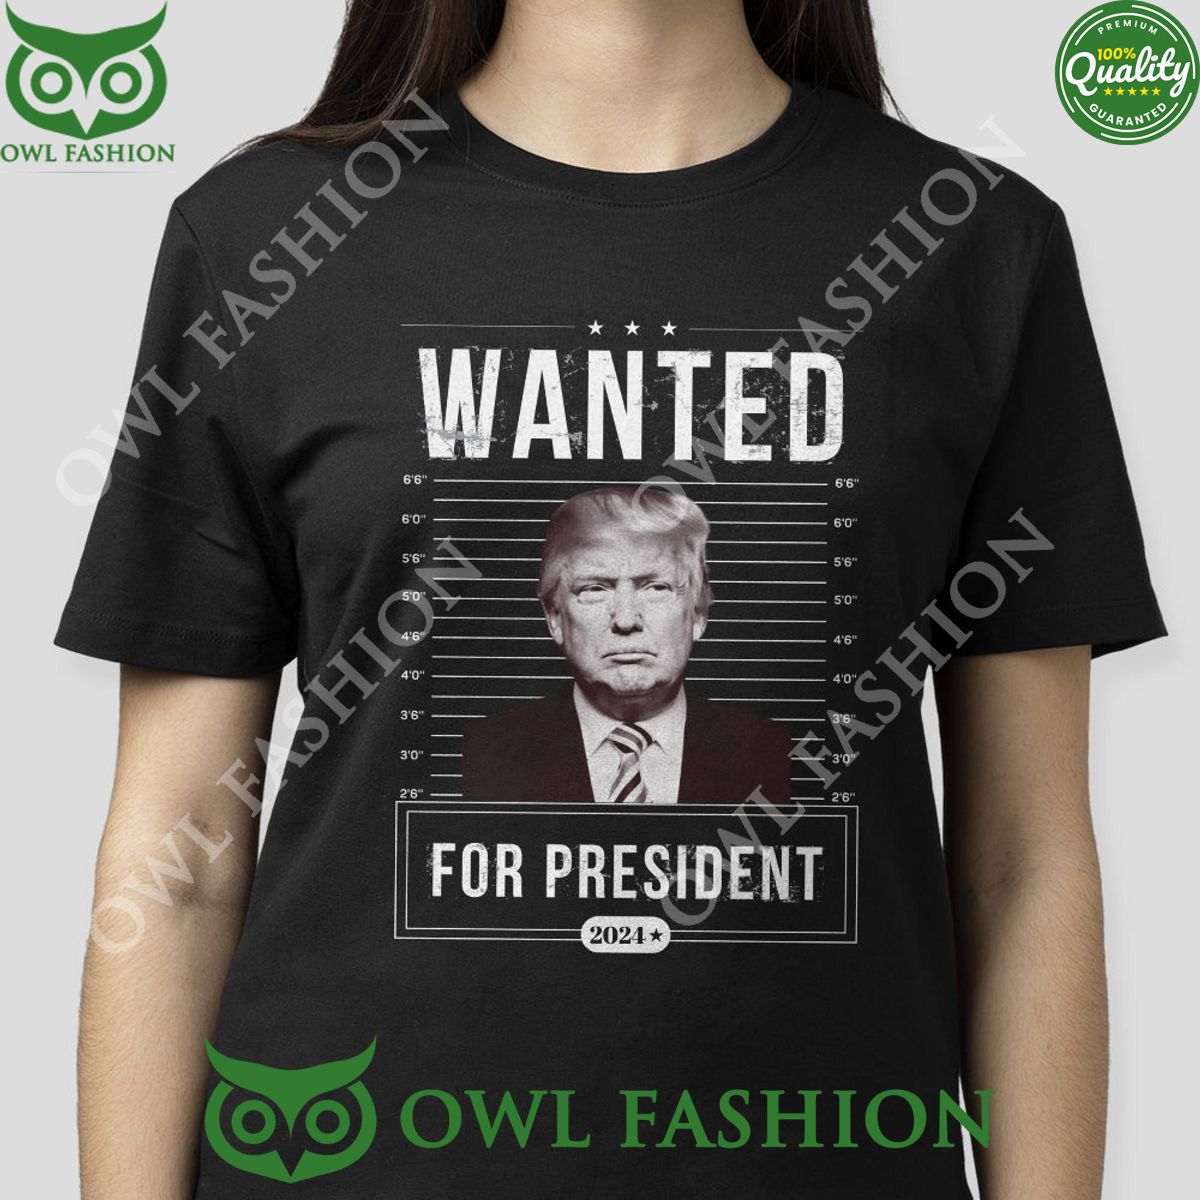 Wanted For President Trump 2024 2d Hoodie Shirt Wow! This is gracious